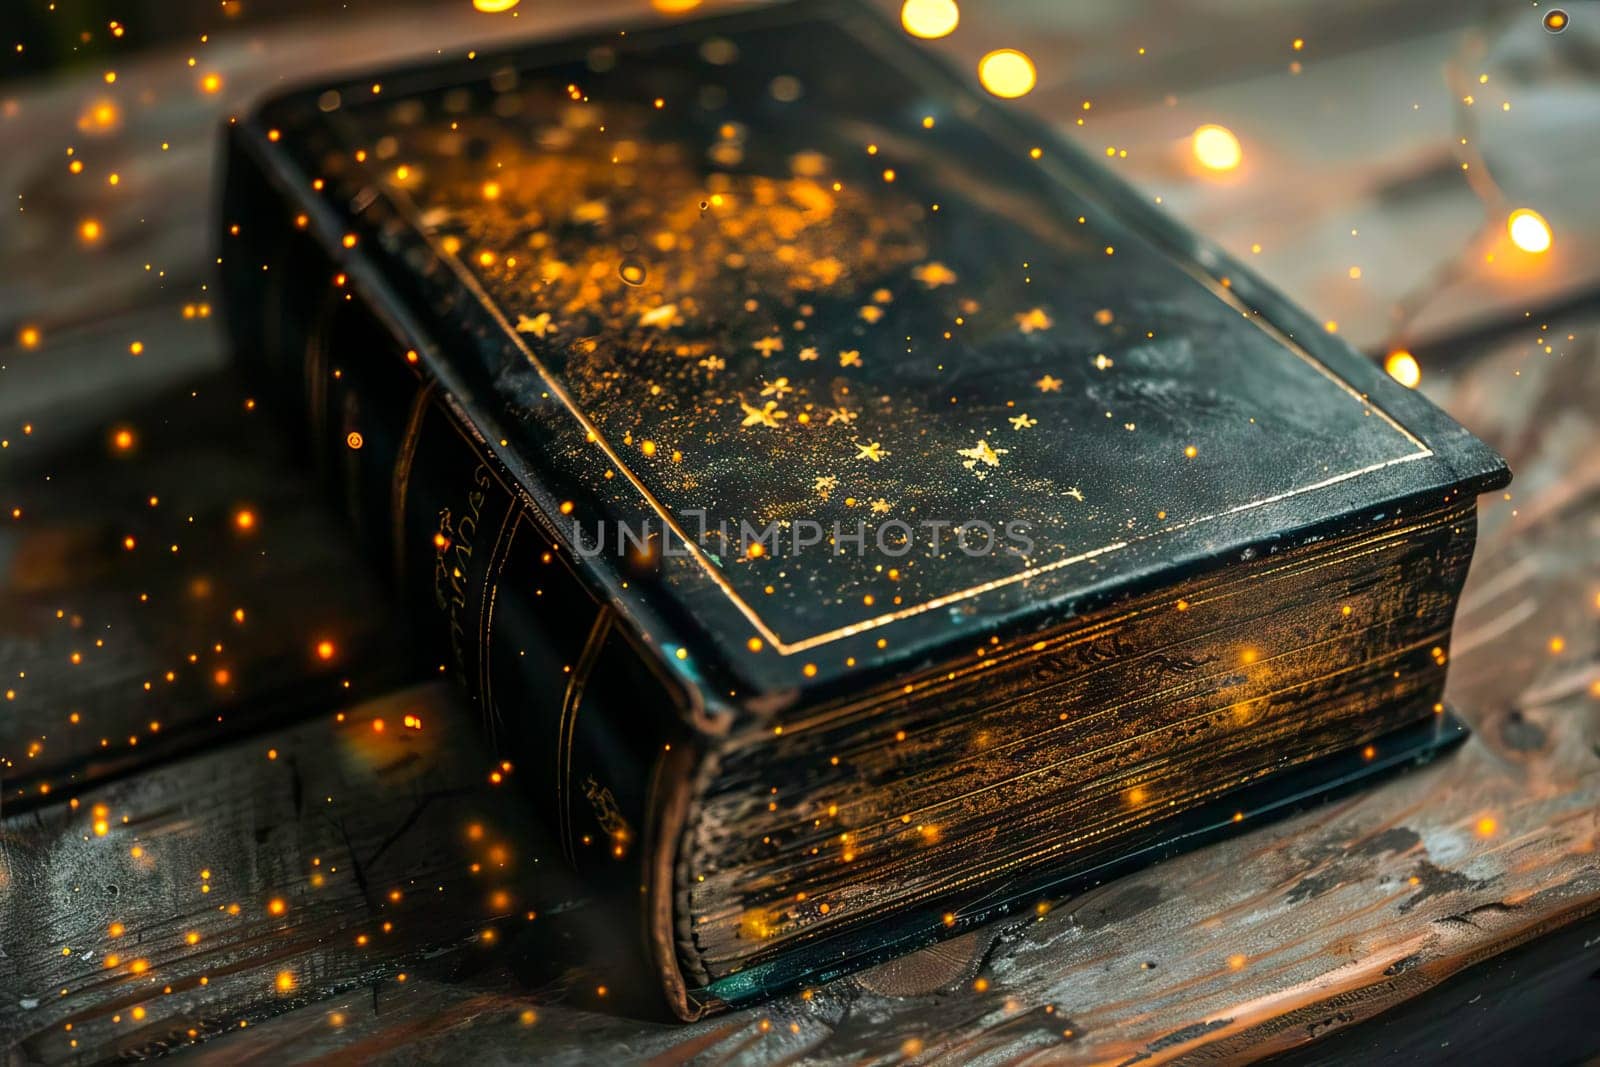 A book decorated with gold stars is placed on a table.